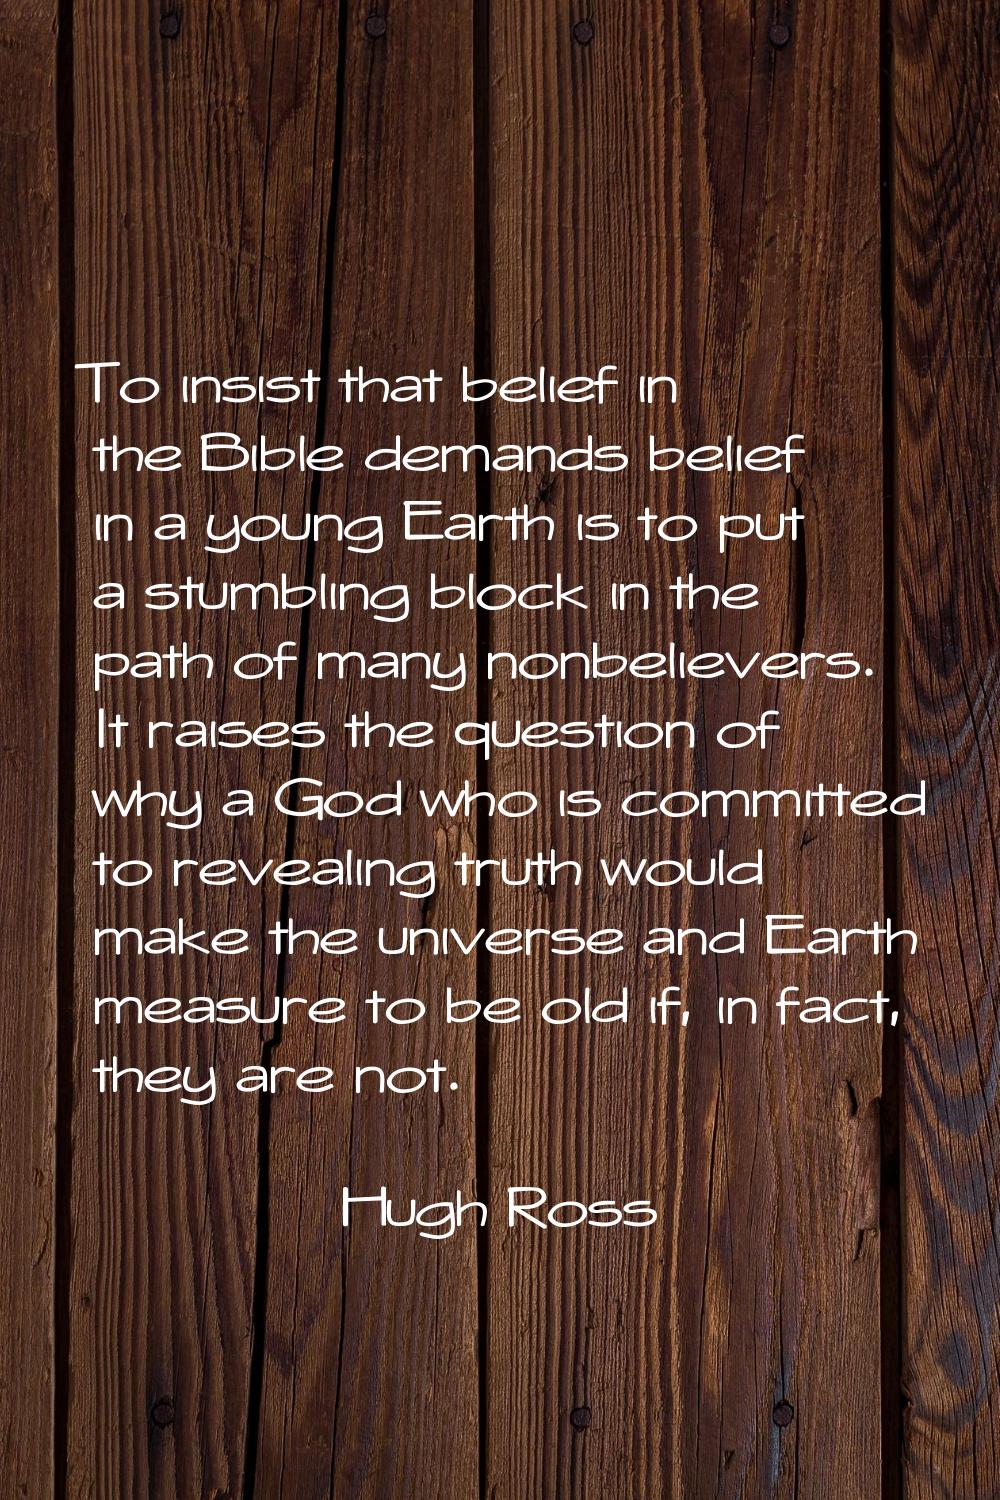 To insist that belief in the Bible demands belief in a young Earth is to put a stumbling block in t